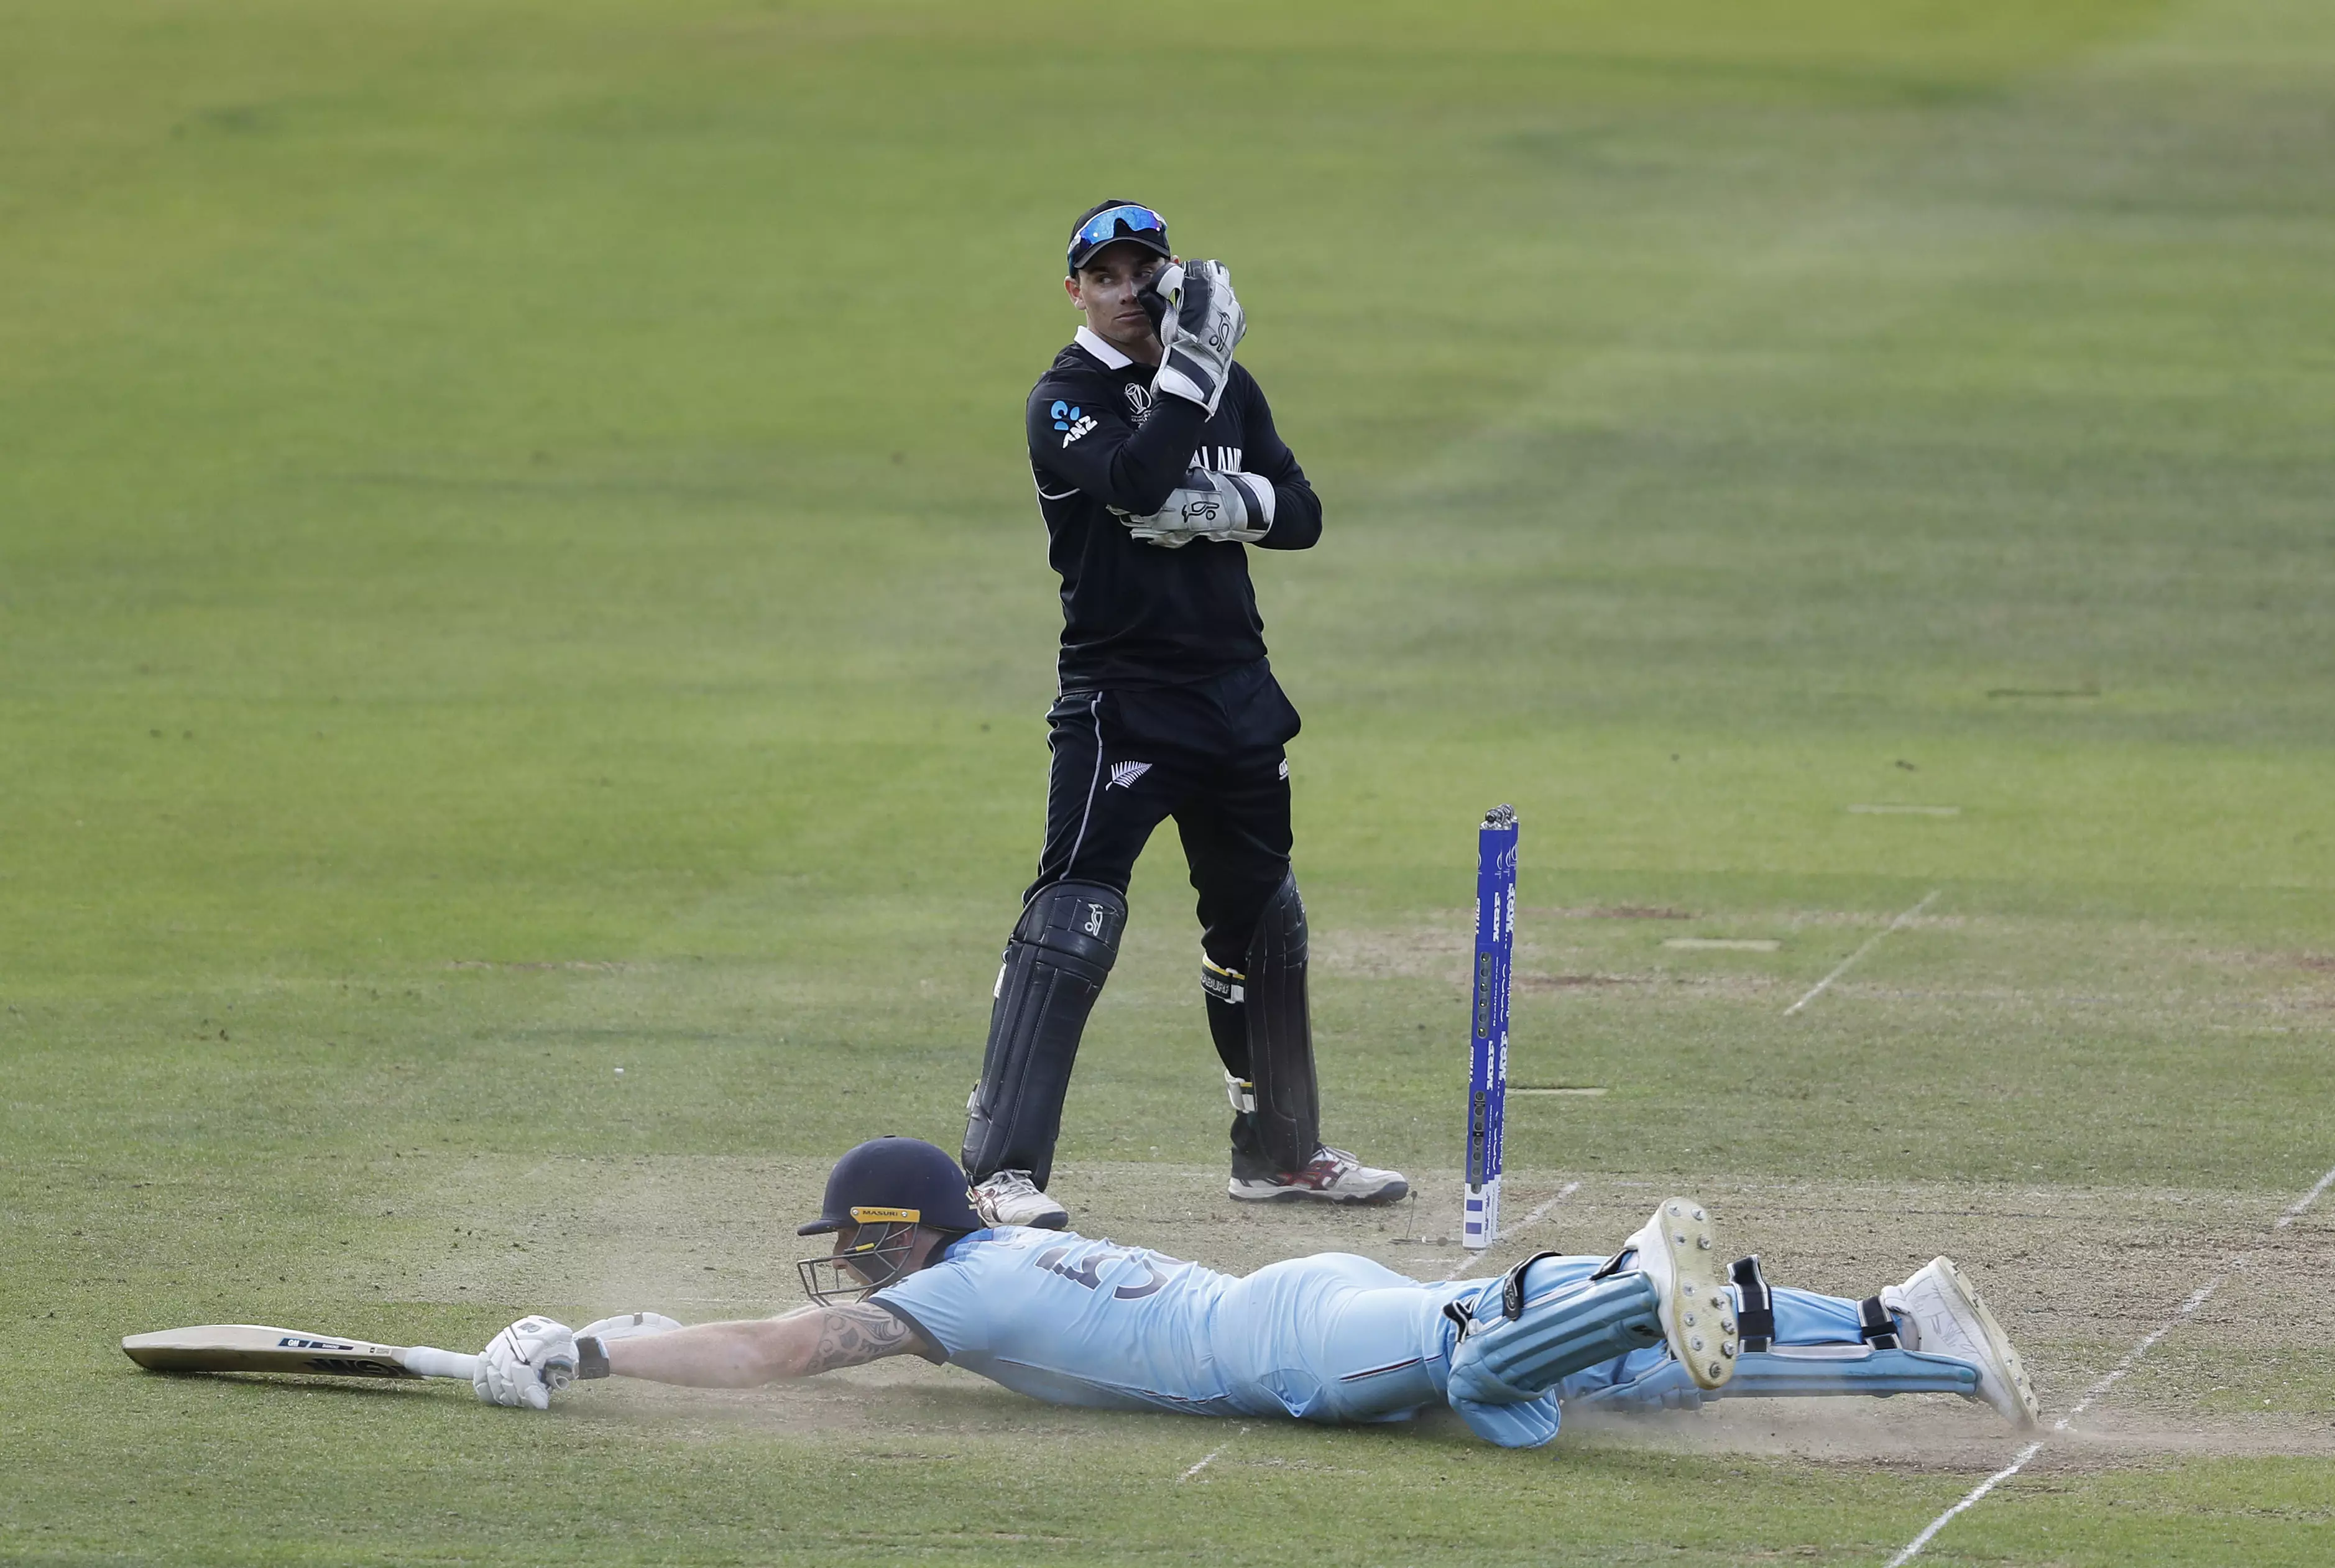 Stokes wasn't going to take another run but the ball rolled for a four. Image: PA Images